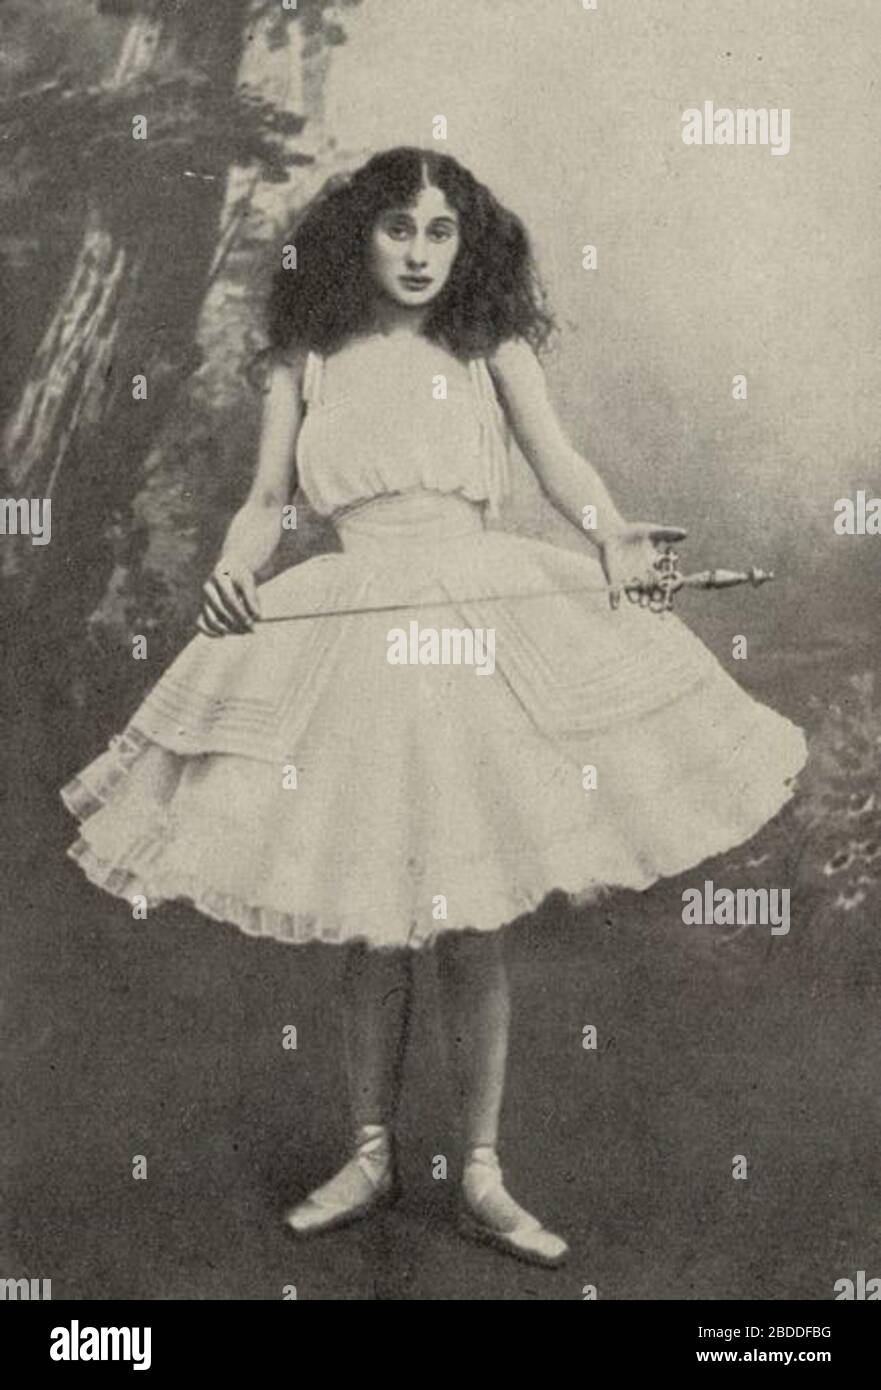 English: Photo of Anna Pavlova (1881-1931) - Prima ballerina of the St.  Petersburg Imperial Theatres - in